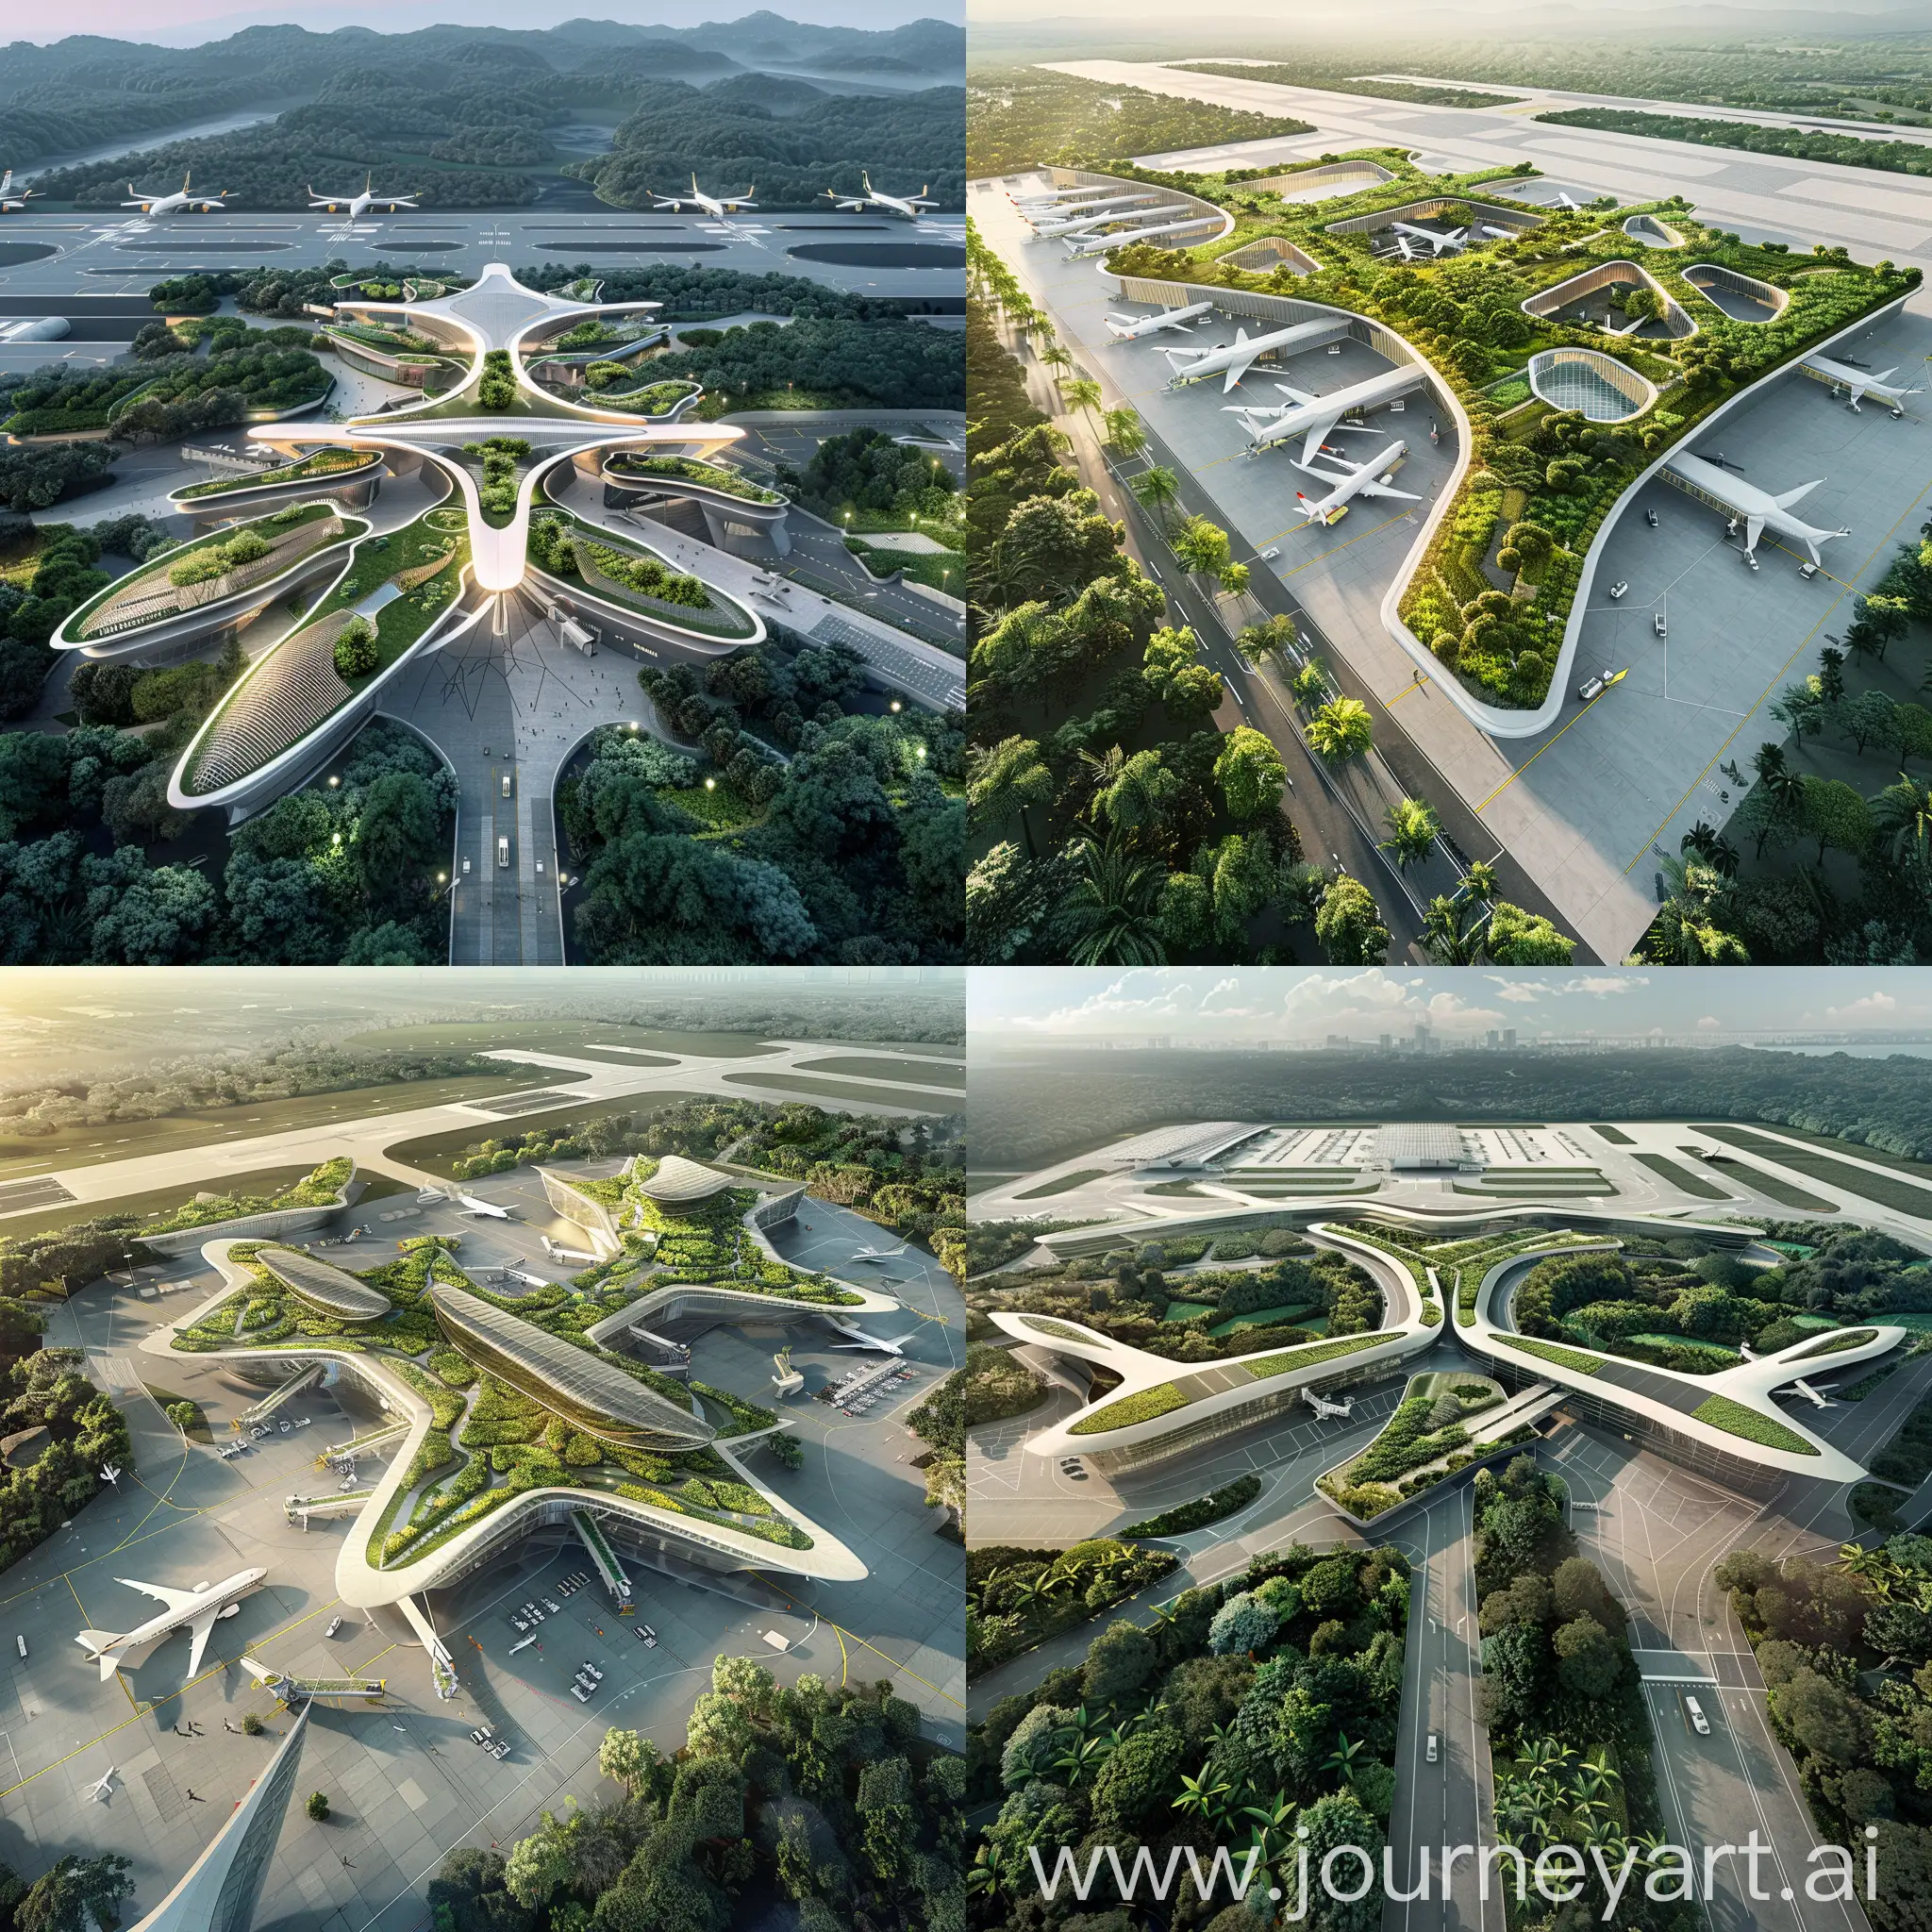 Sustainable-Modern-Architecture-at-Airport-Surrounded-by-Lush-Greenery